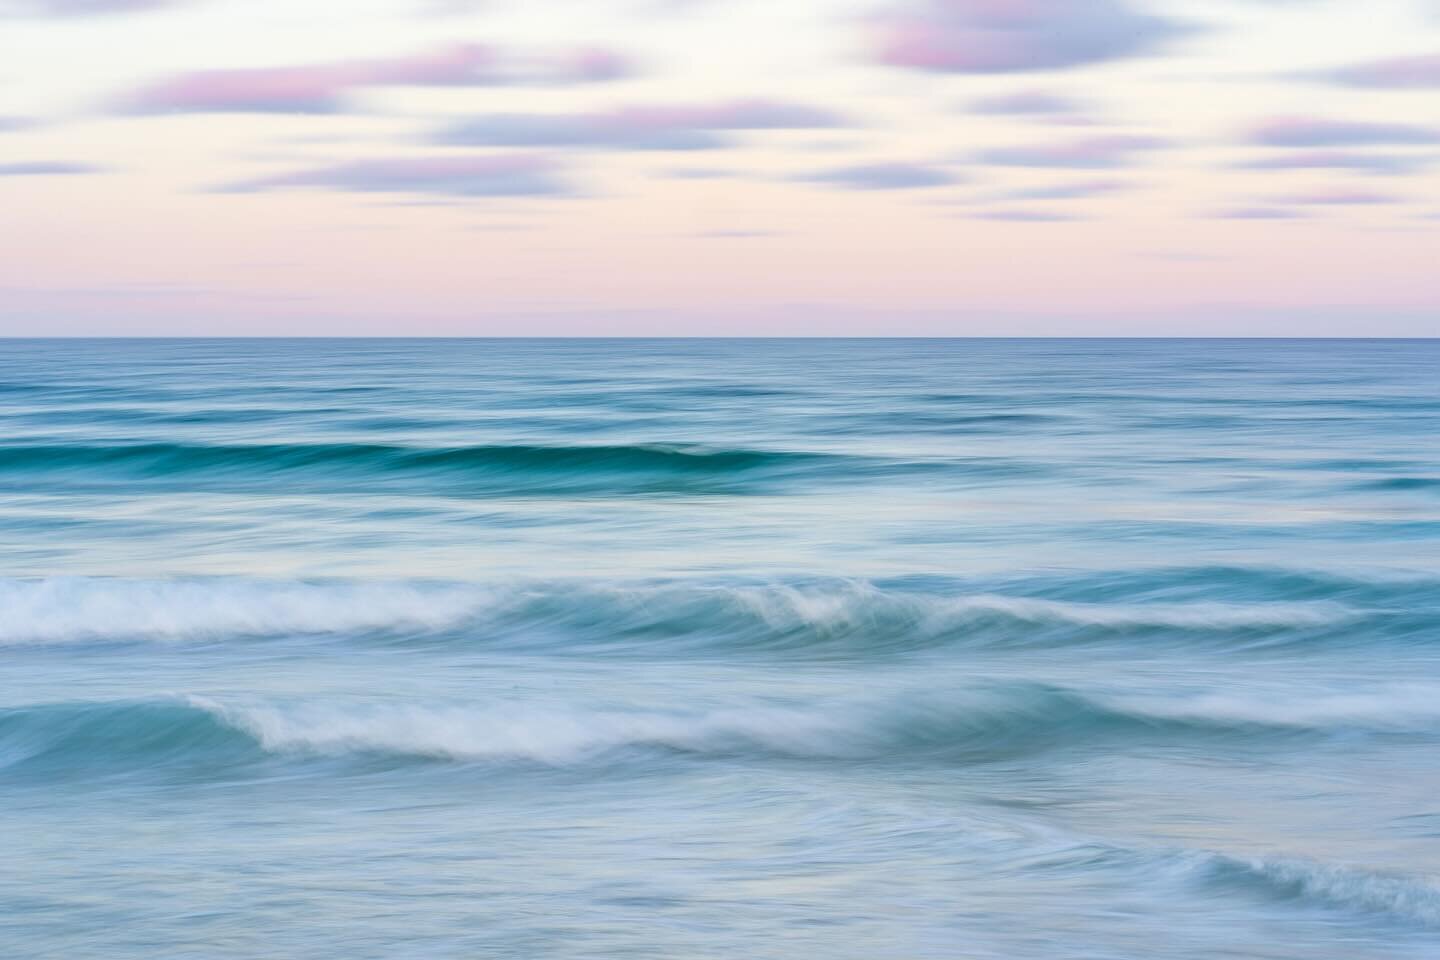 A motion blur seascape capture in Palm Beach, Australia. 

Orientation: Landscape

Printed on Fine Art Premium Paper.

Free Worldwide Shipping. Ships within 7-10 business days. 

Includes Print Only. Please, contact us for custom sizes and/or framing